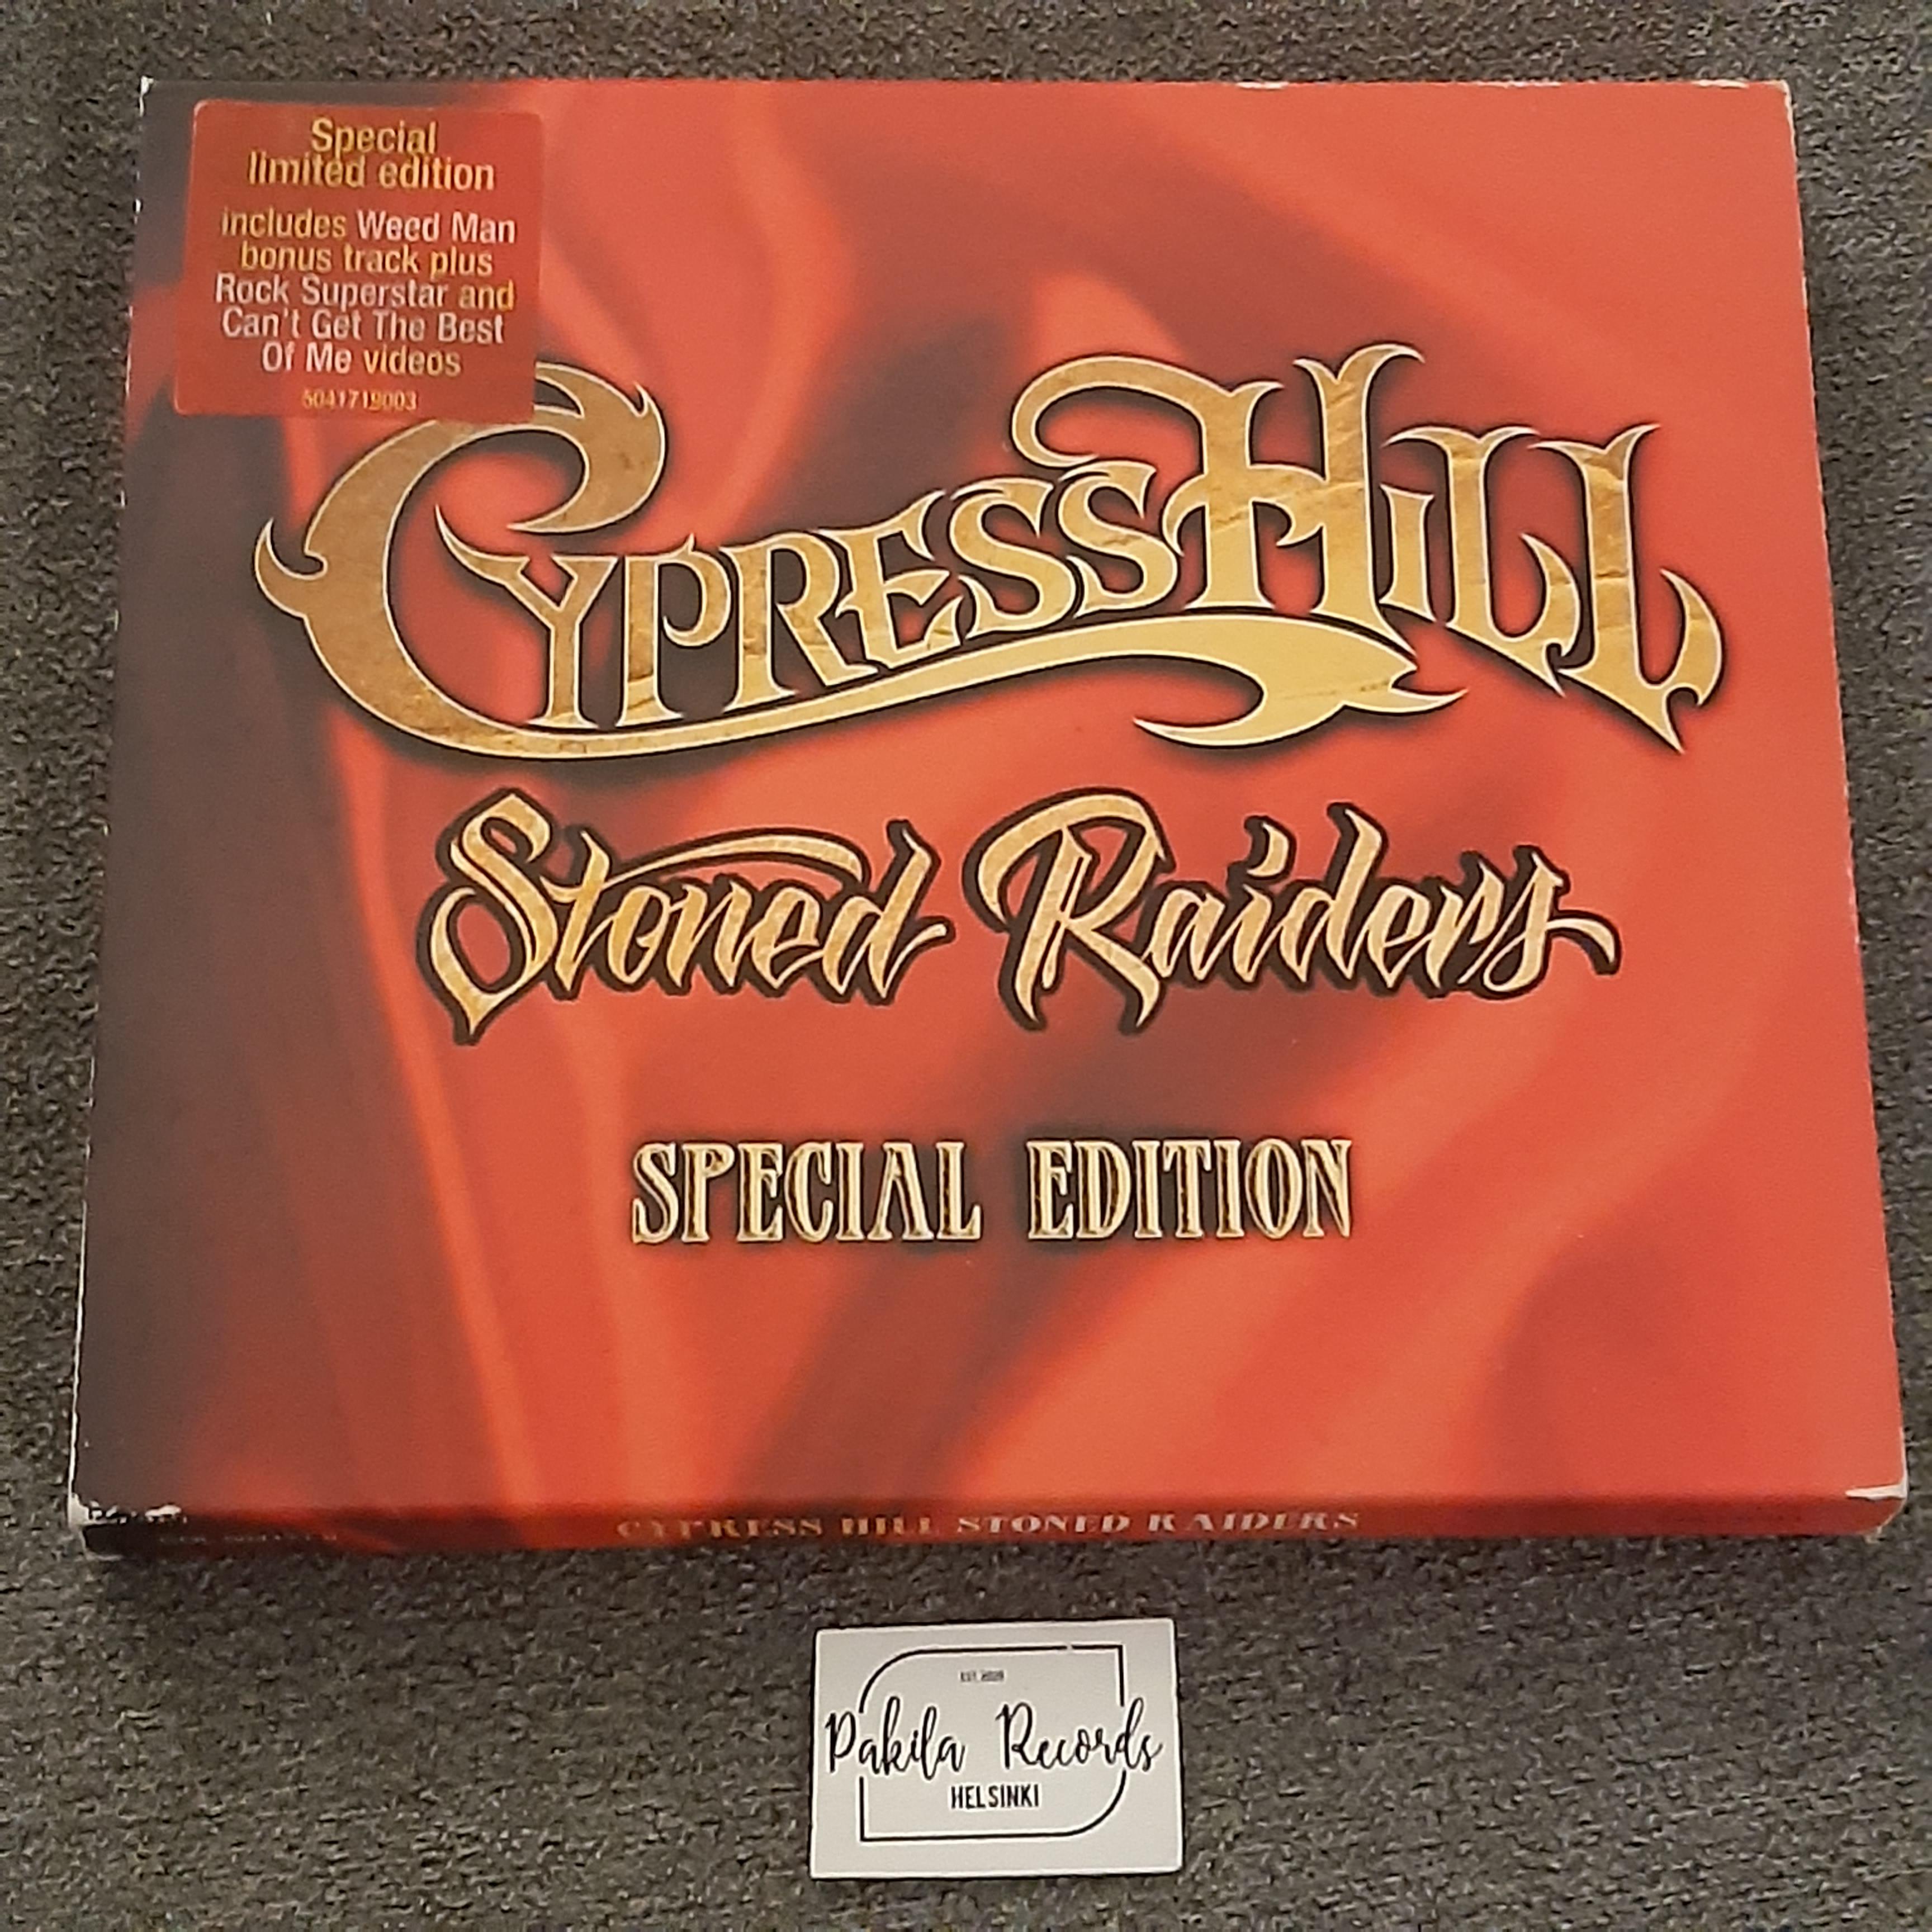 Cypress Hill - Stoned Raiders, Special Edition - CD (käytetty)